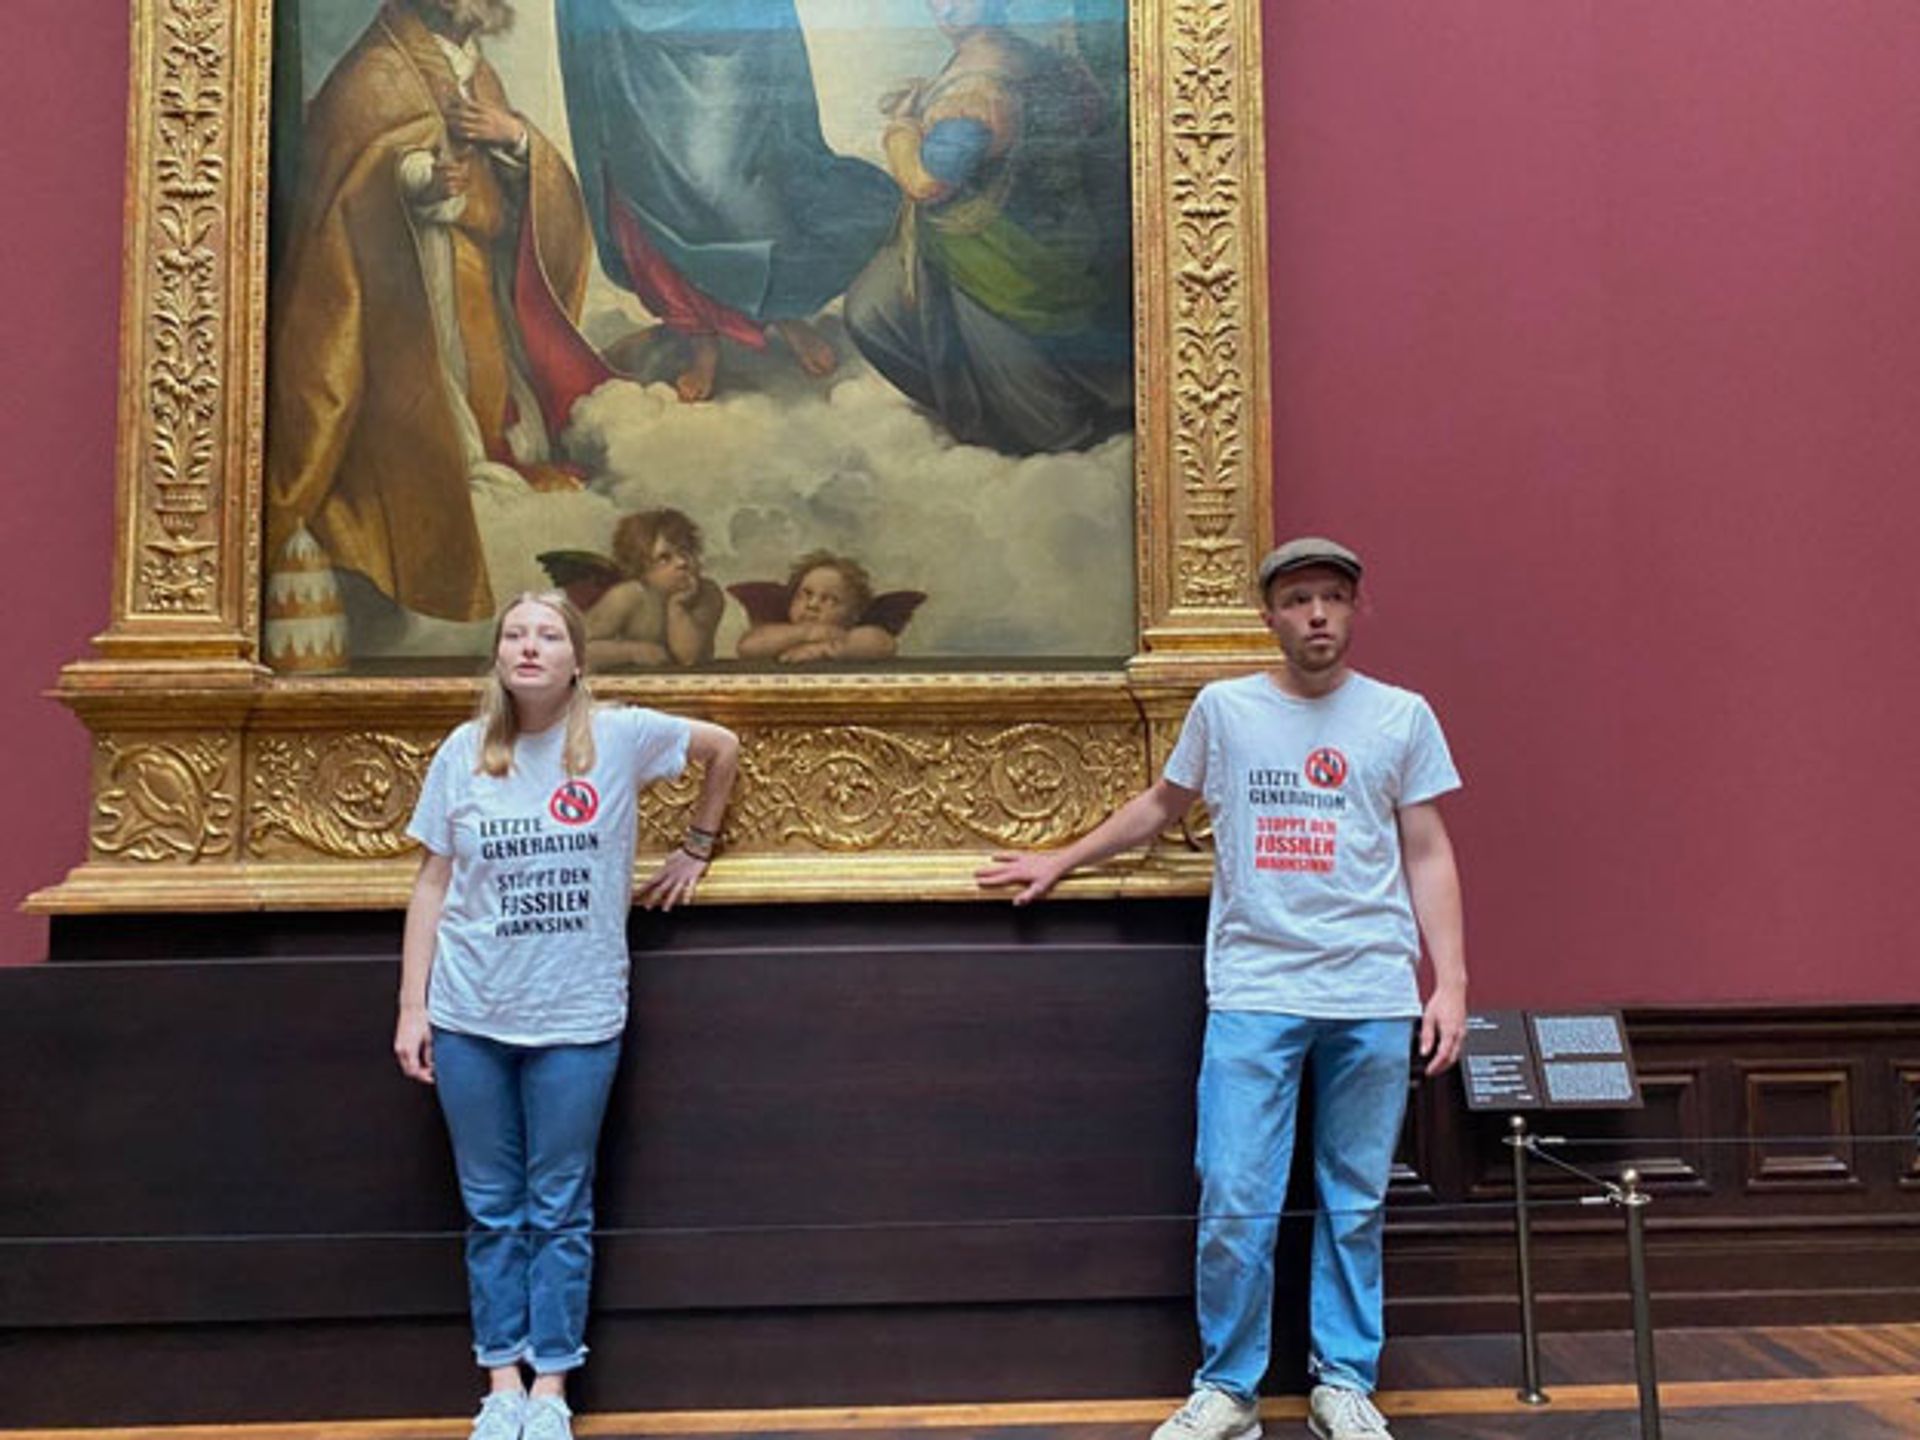 Protesters from Letzte Generation glue themselves to the frame of Raphael's Sistine Madonna (1512-13) in the Gemäldegalerie Alte Meister in Dresden